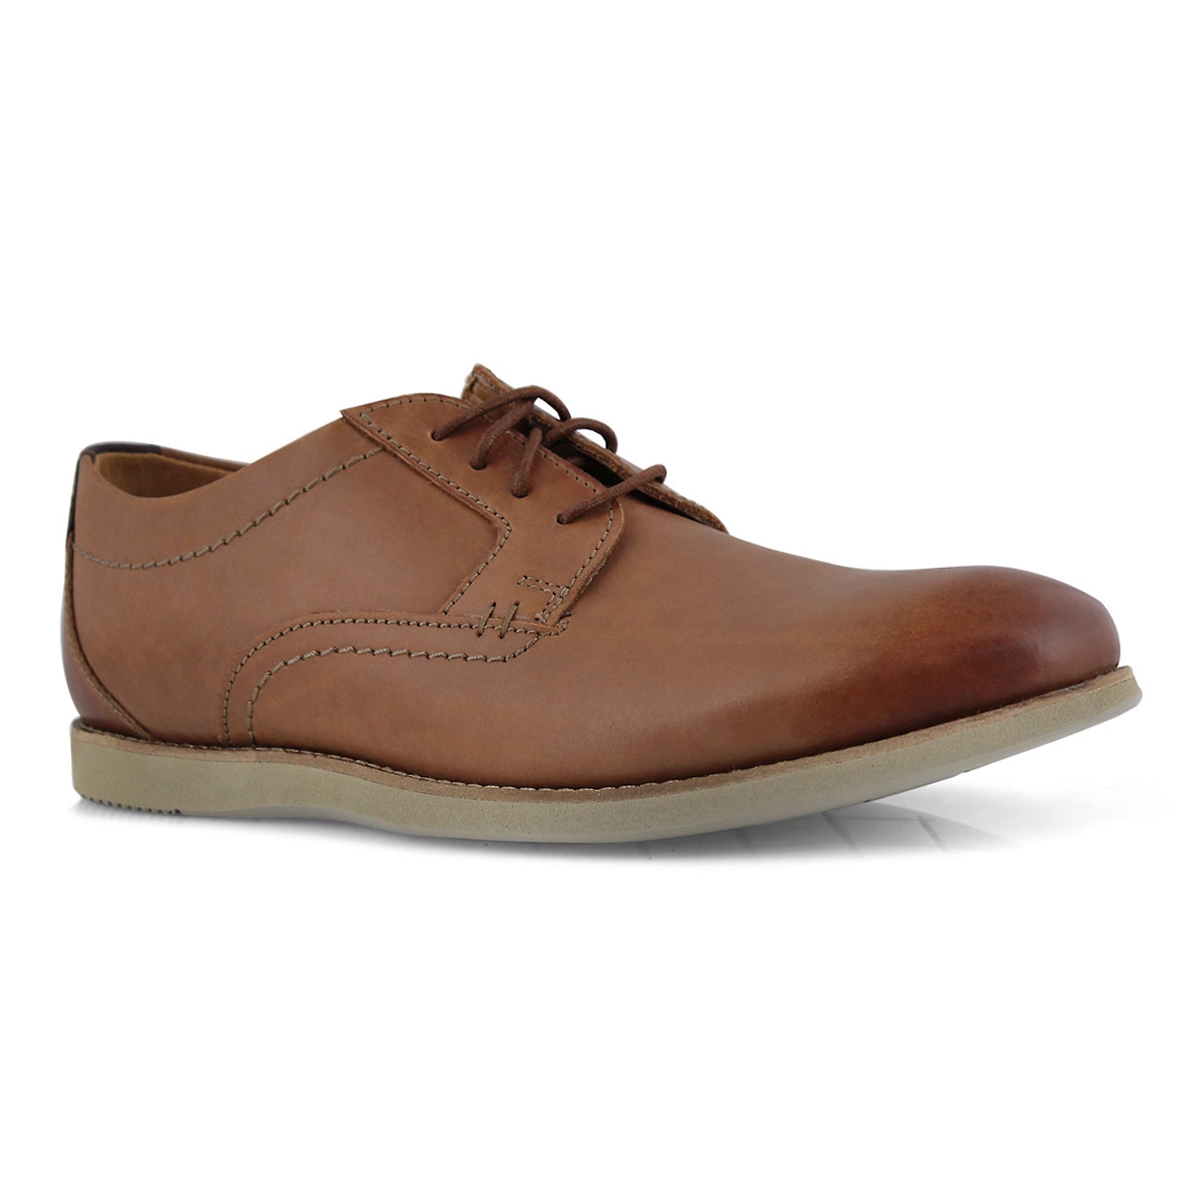 clarks dress shoes canada